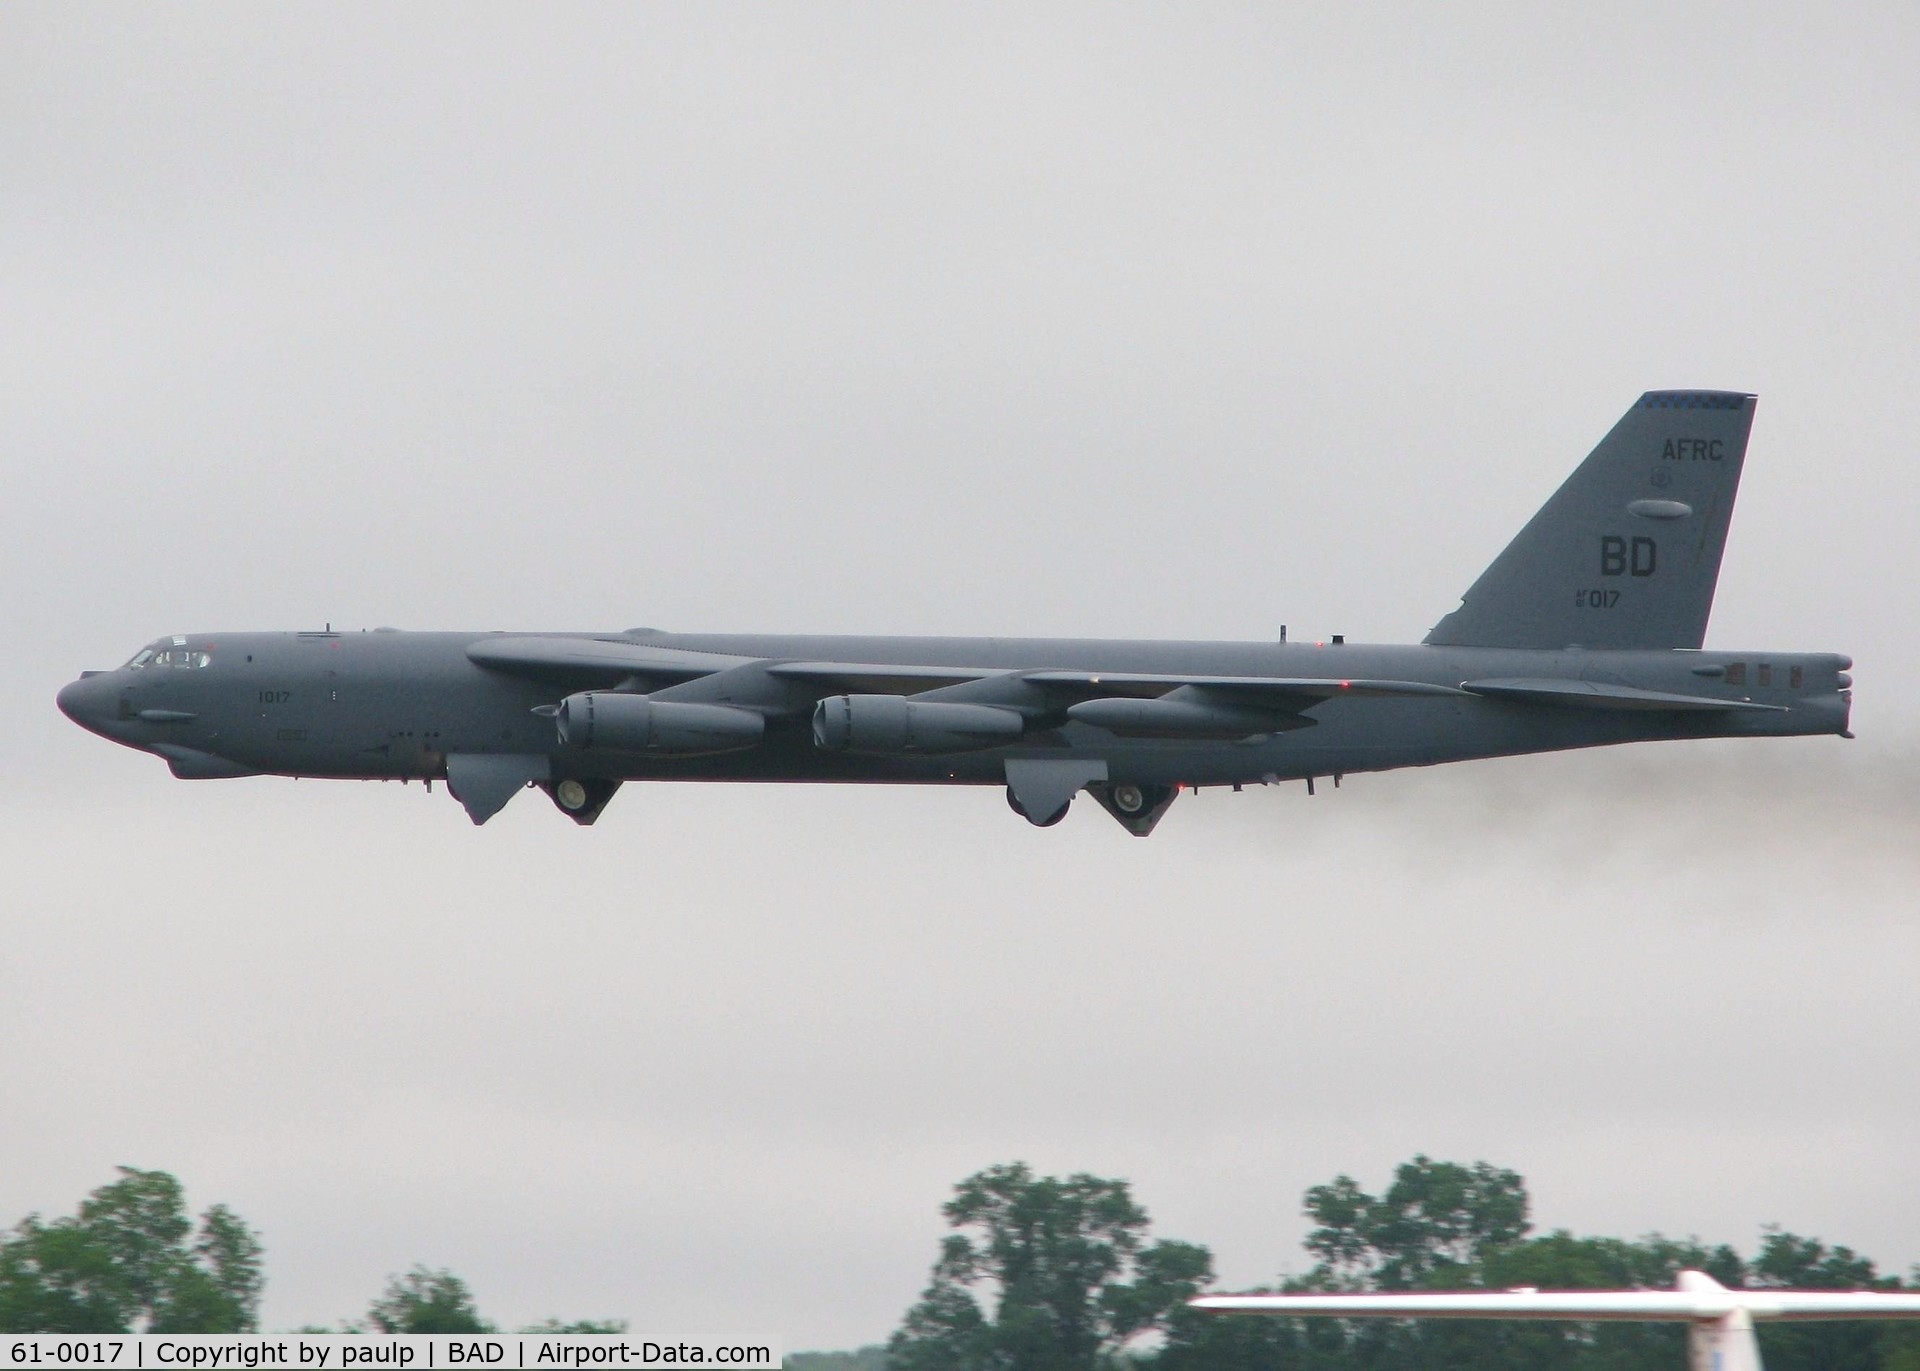 61-0017, 1961 Boeing B-52H Stratofortress C/N 464444, Making a low pass over the field at the Defenders of Liberty Airshow 2009 at Barksdale Air Force Base, Louisiana.